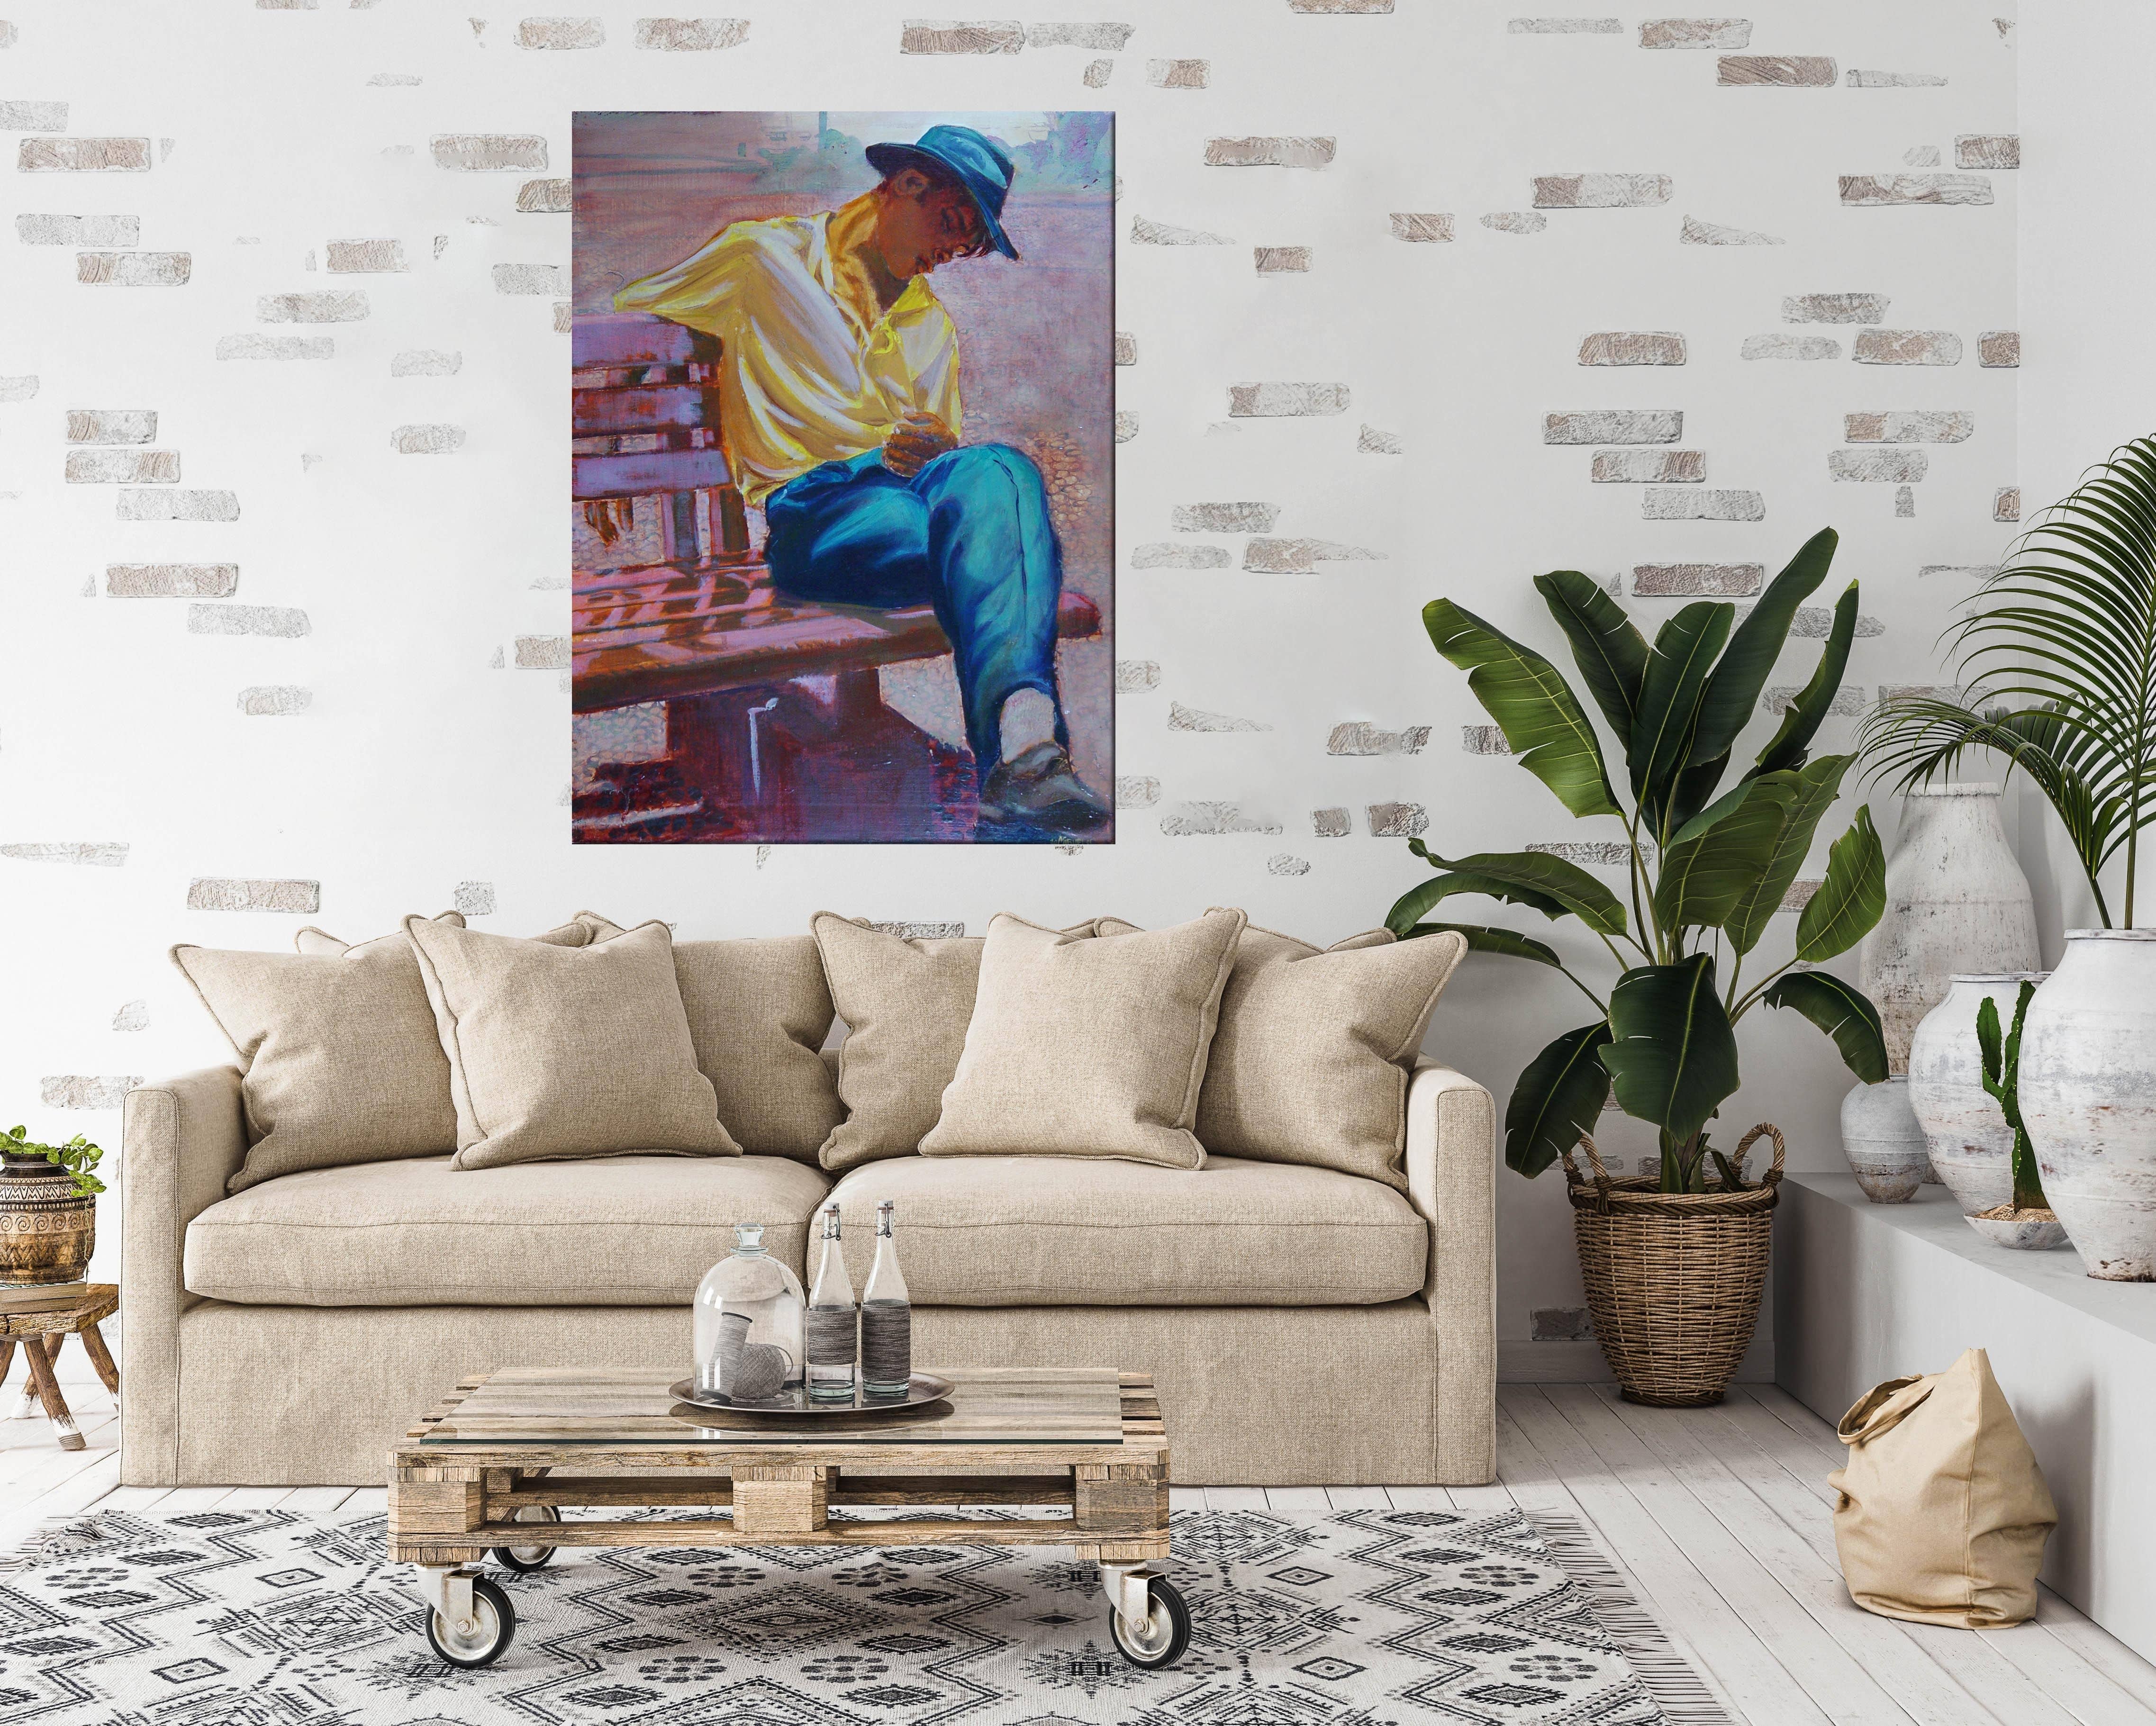 Painting of younger boy pictured in Soneca displayed on the wall in rustic living room setting